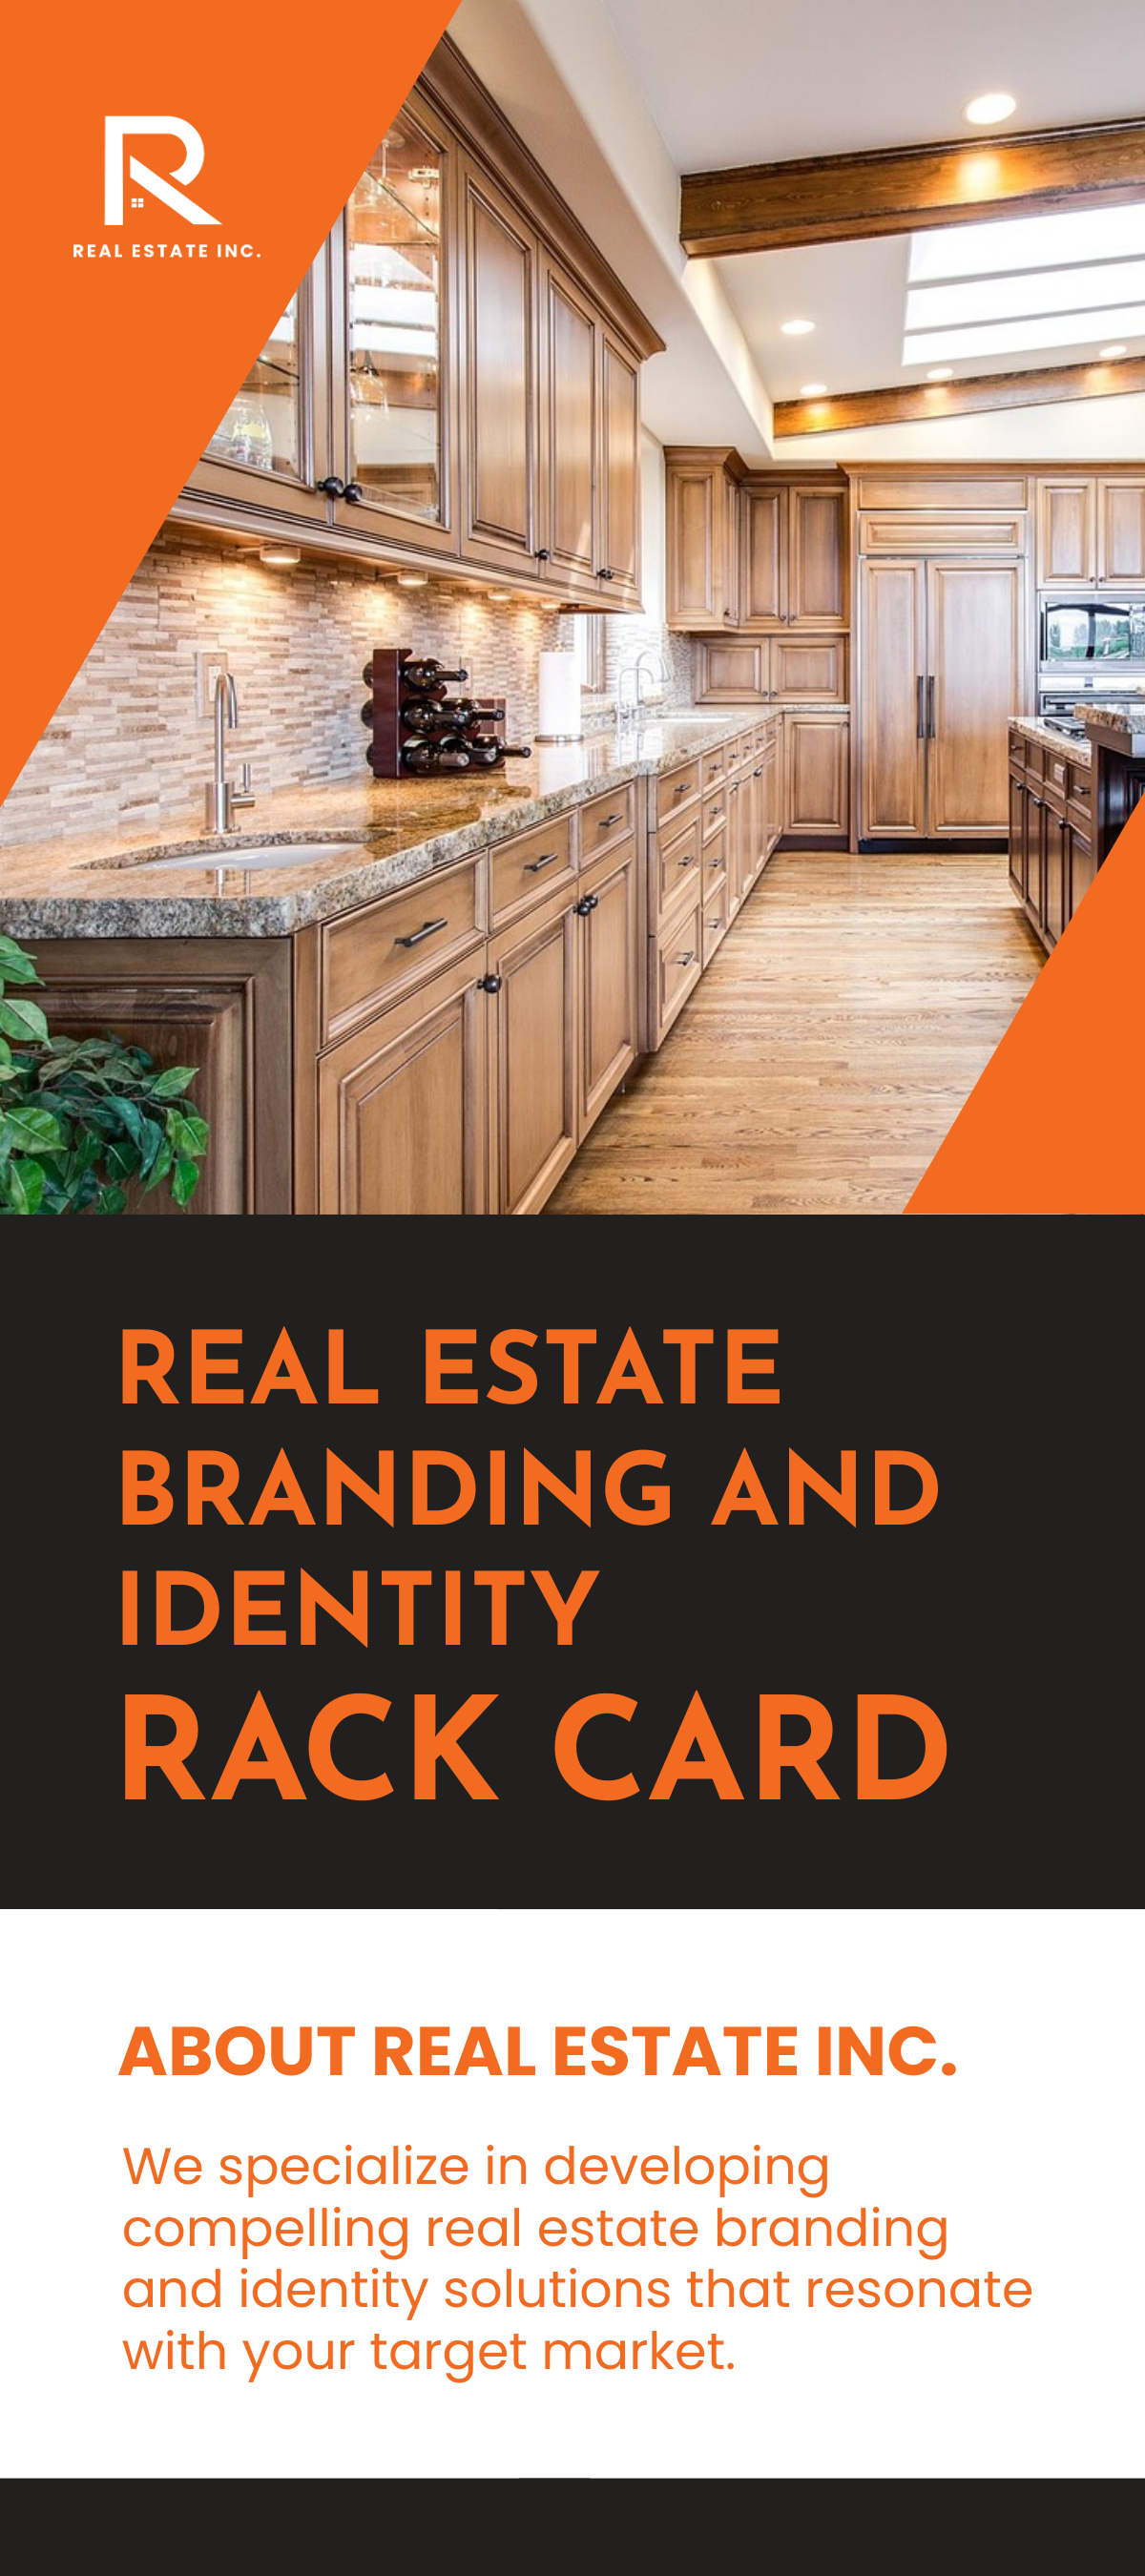 Real Estate Branding and Identity Rack Card